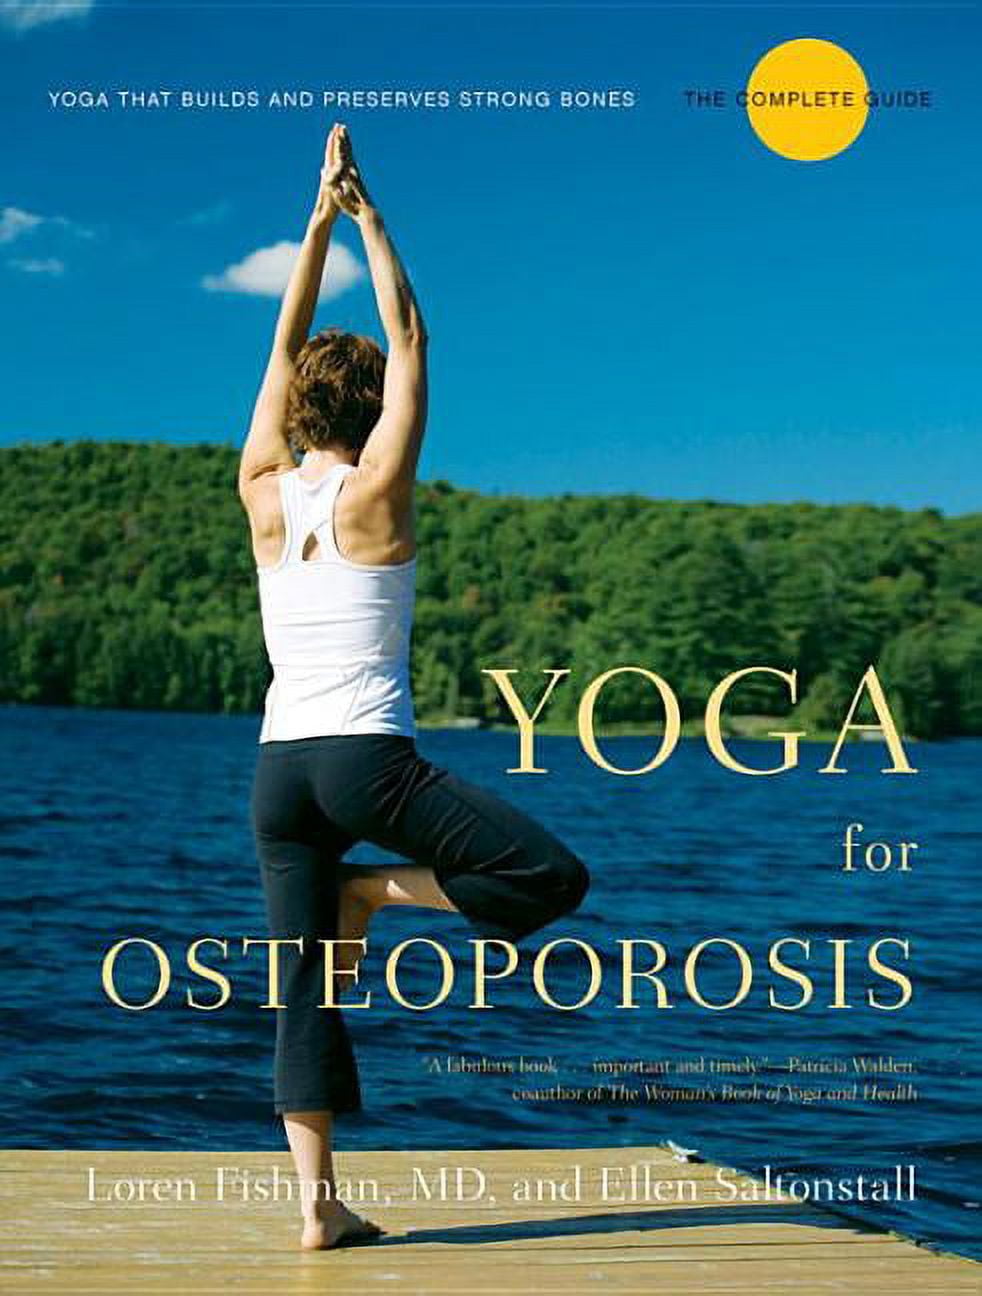 Yoga and Osteoporosis-It Can Build Bone! — Better Bones